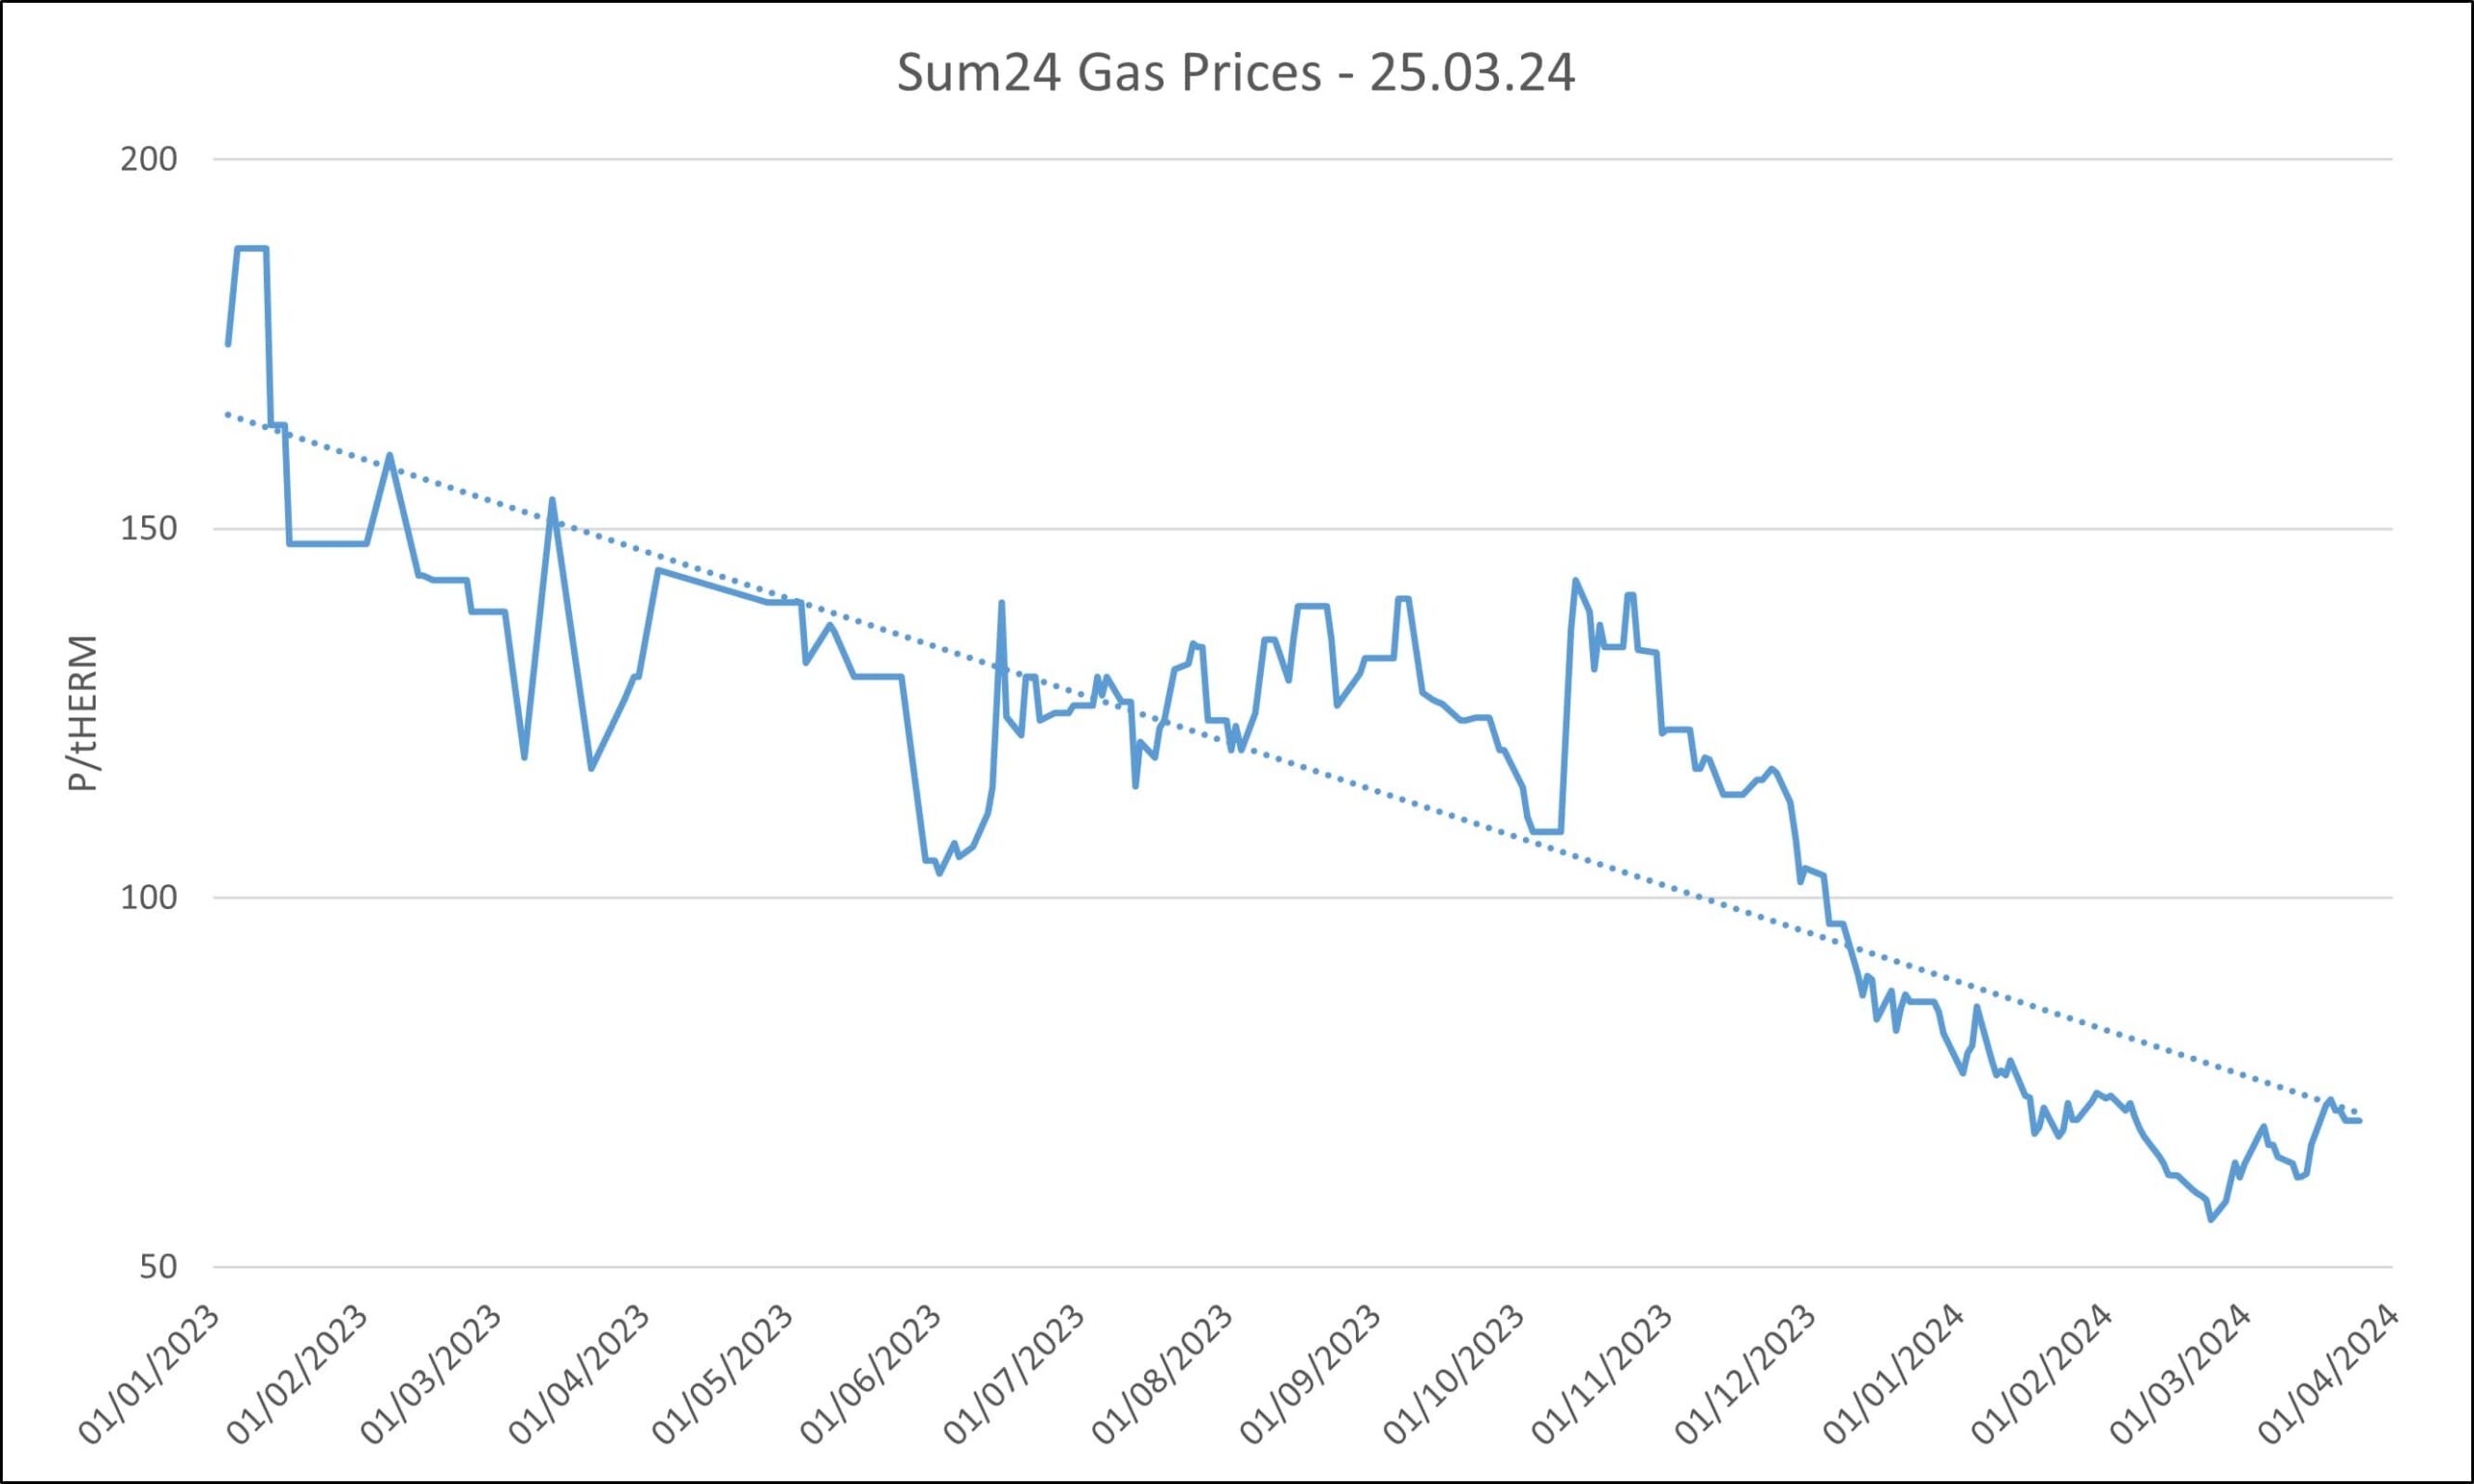 wholesale gas price charts Wum24 25.03.24